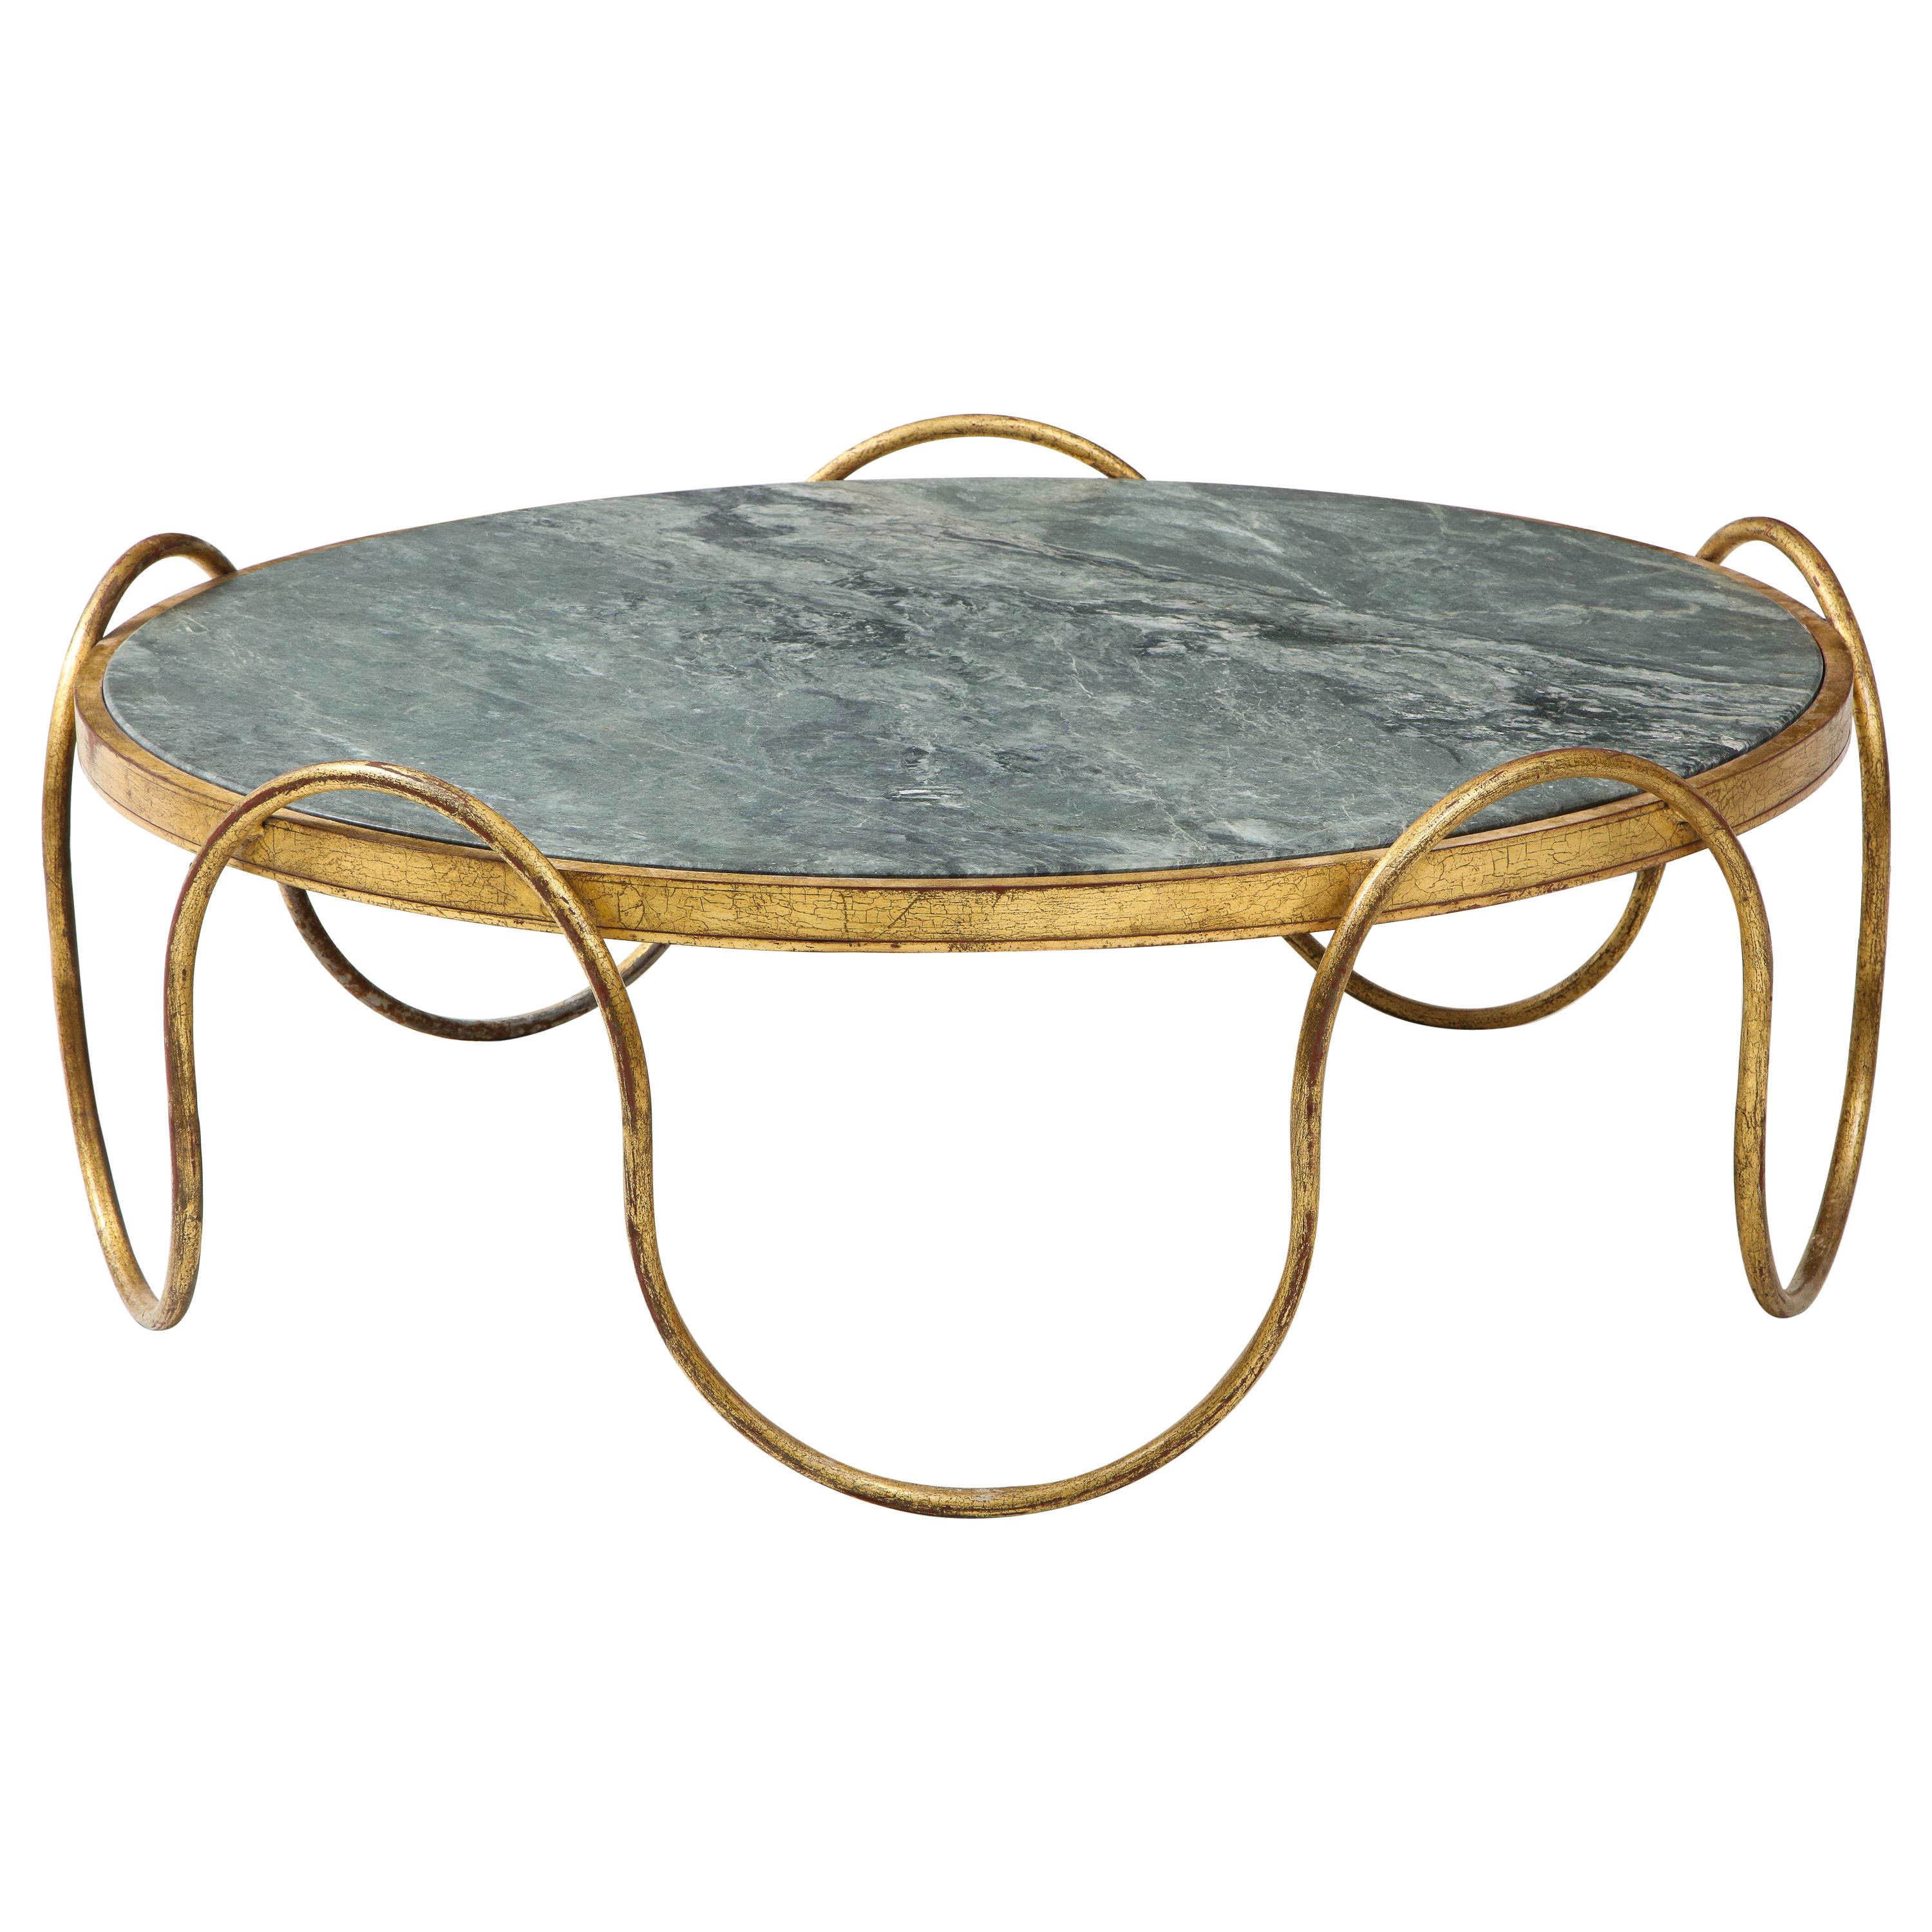  Ondulation Coffee Table in the Manner of Royere